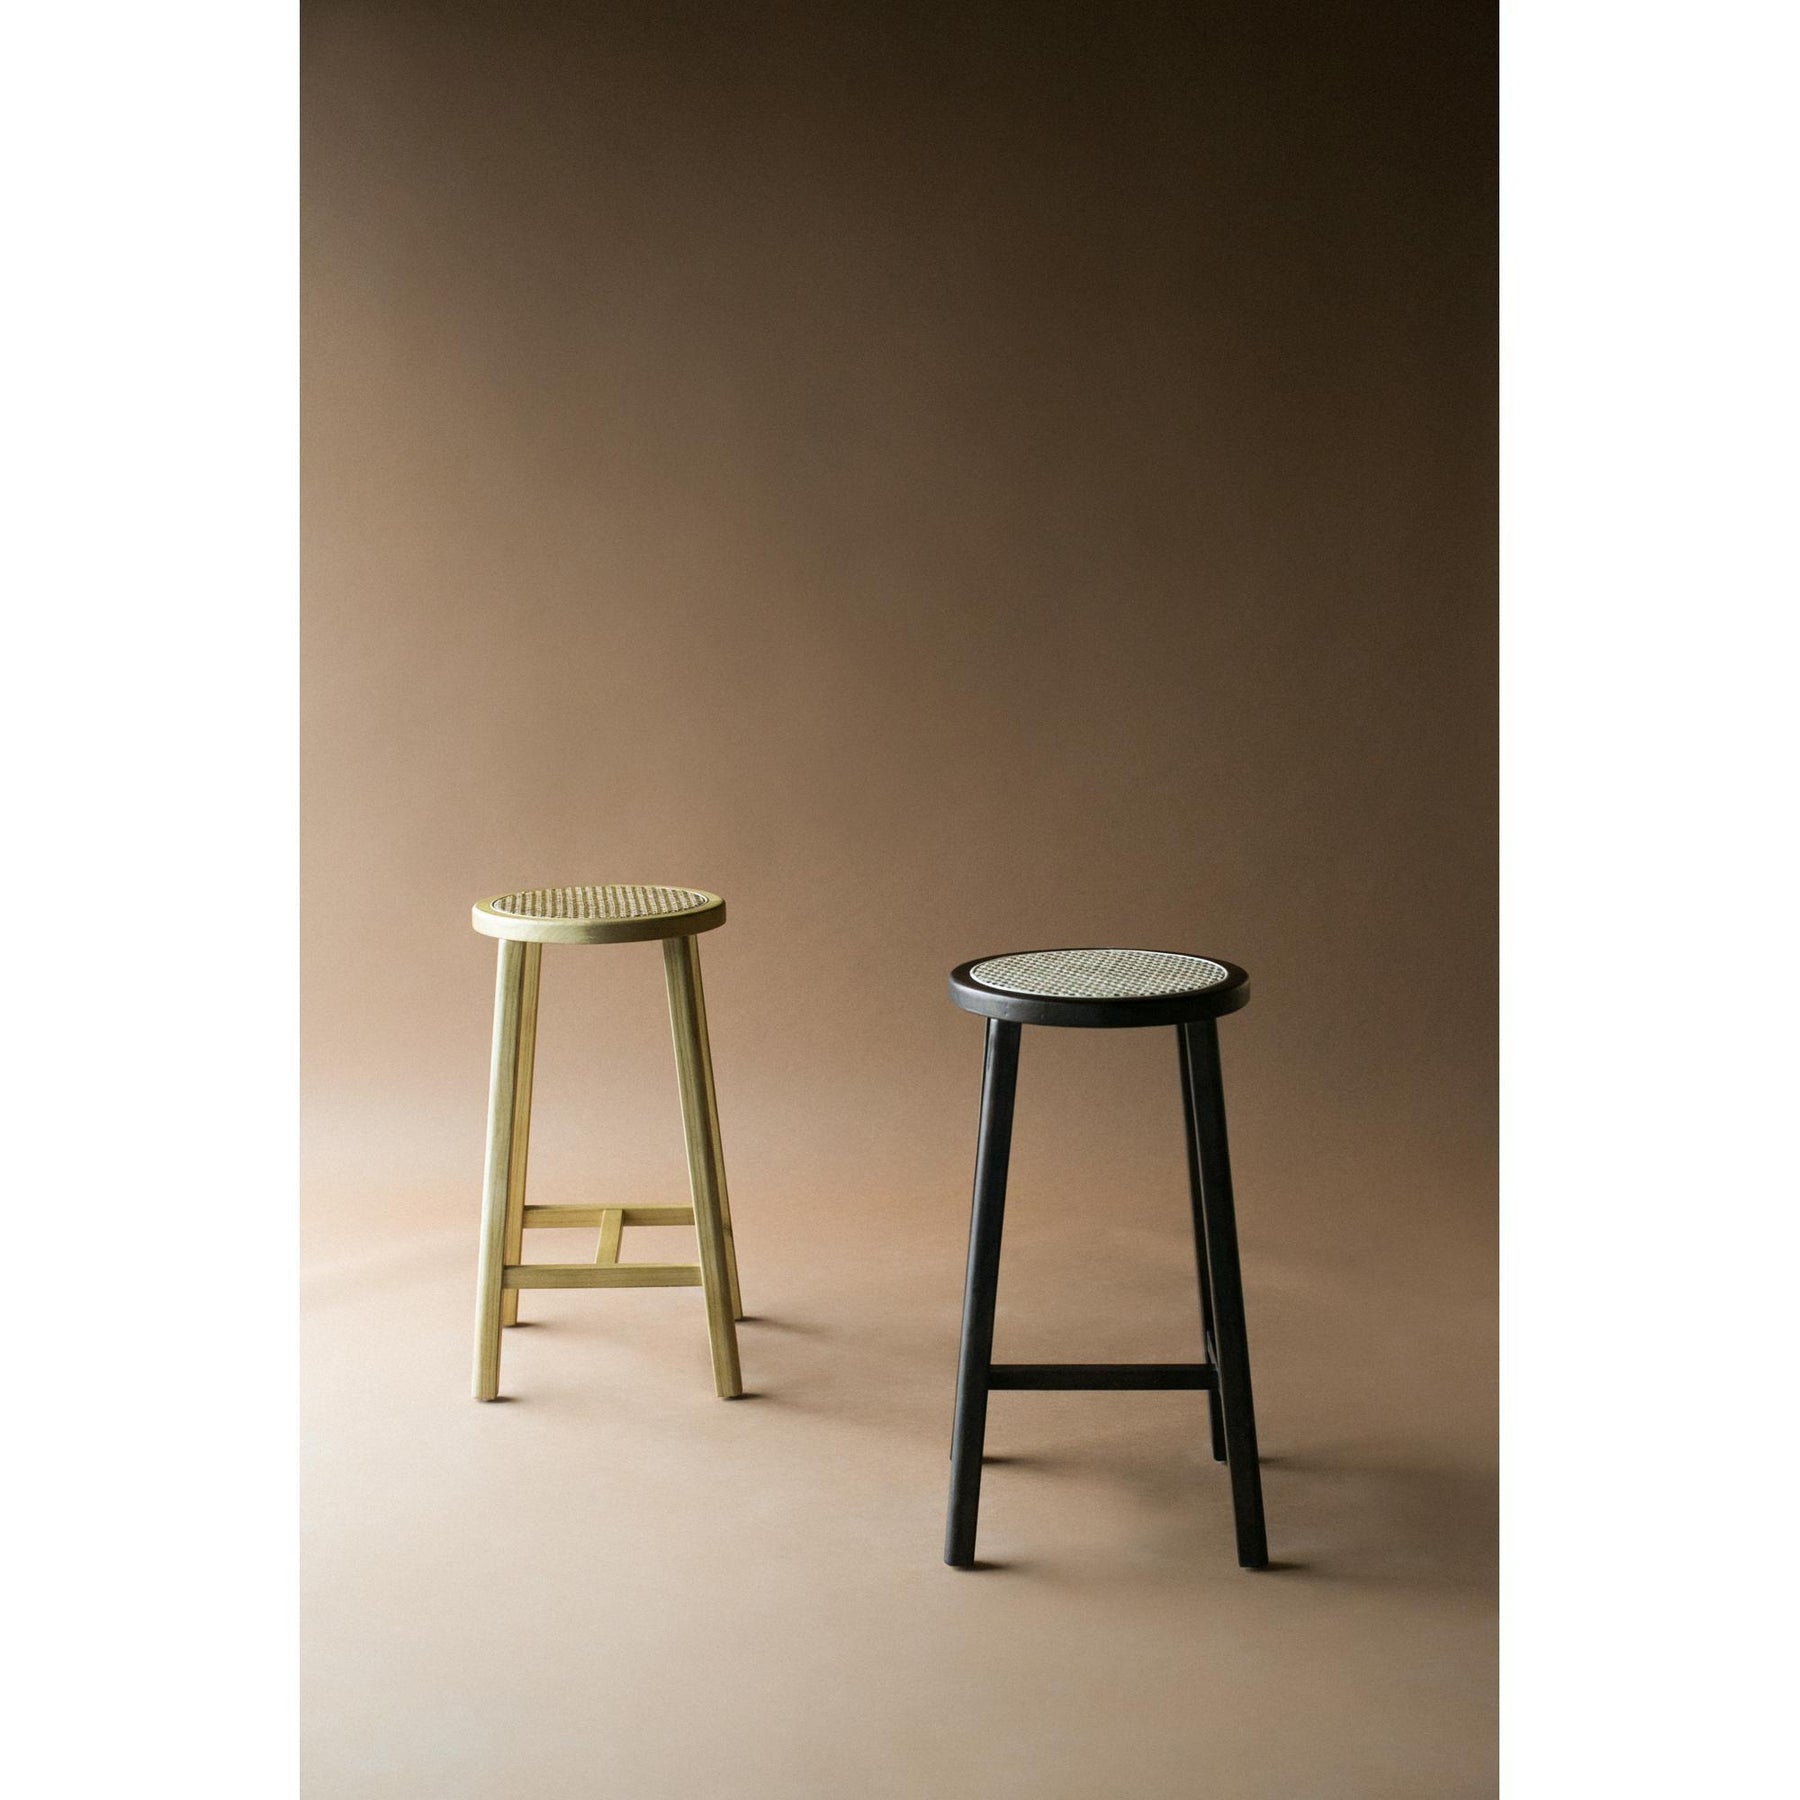 Moe's Home Collection Mcguire Barstool Natural - FG-1025-24